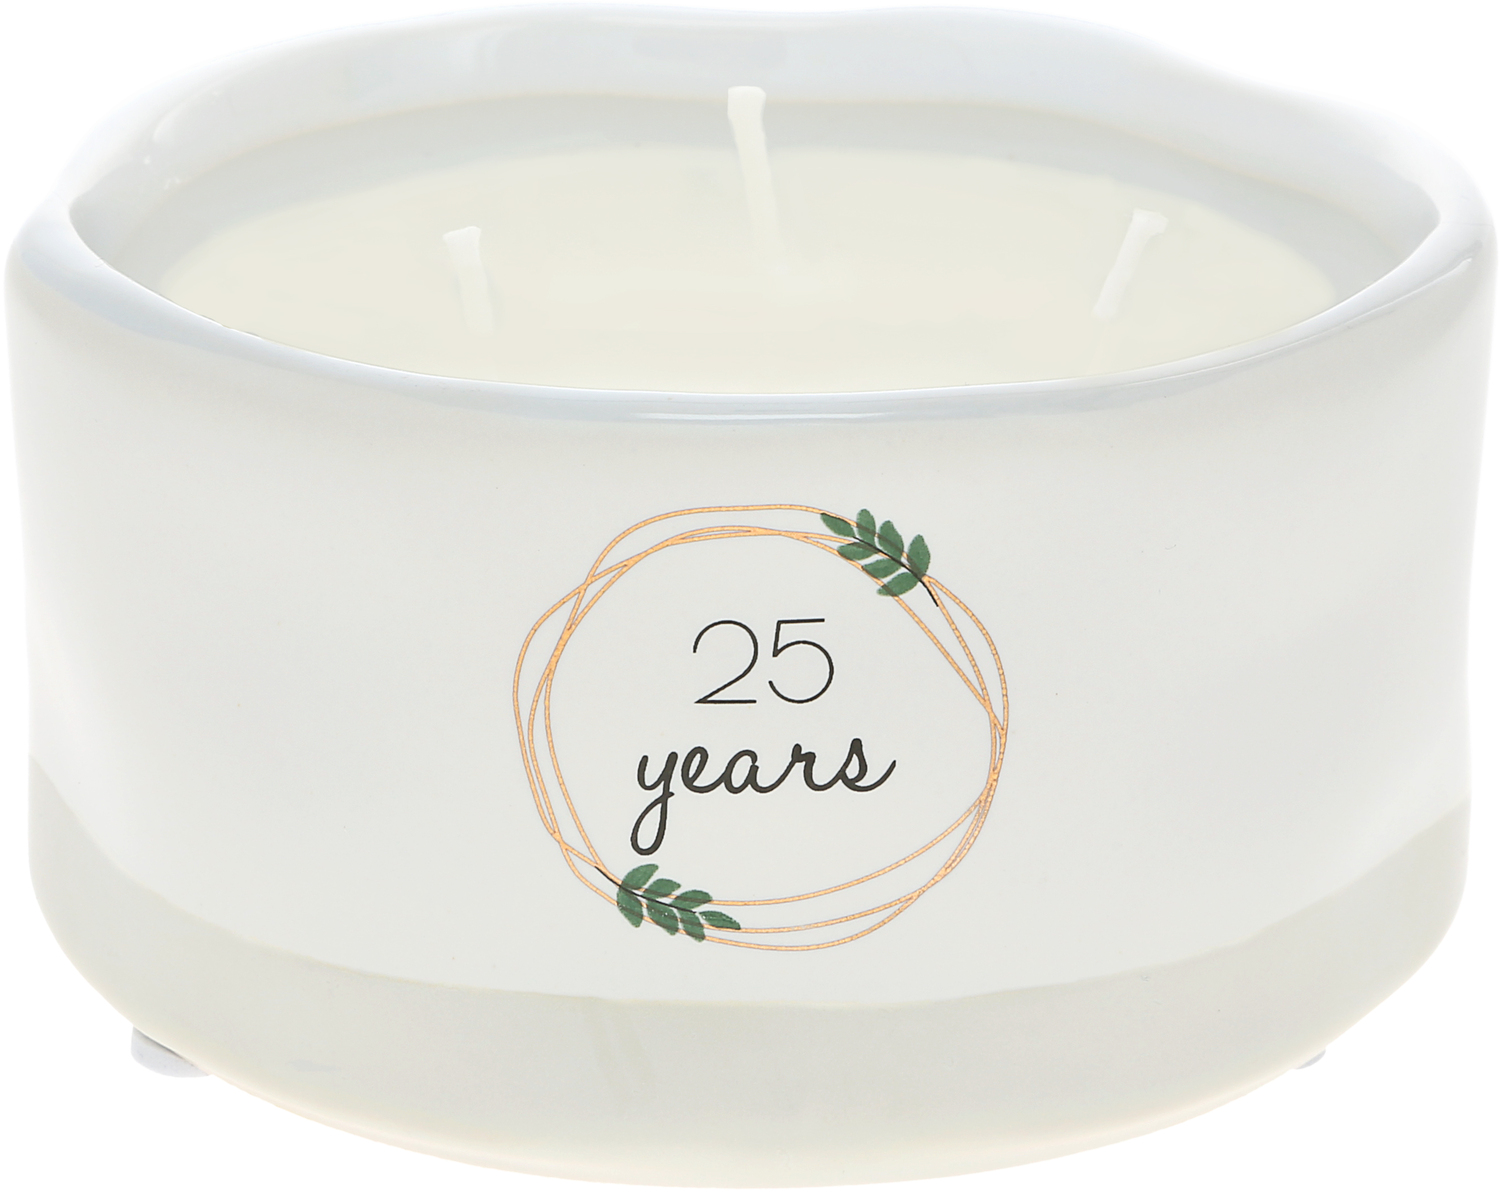 25 Years by Love Grows - 25 Years - 8 oz - 100% Soy Wax Reveal Candle
Scent: Tranquility